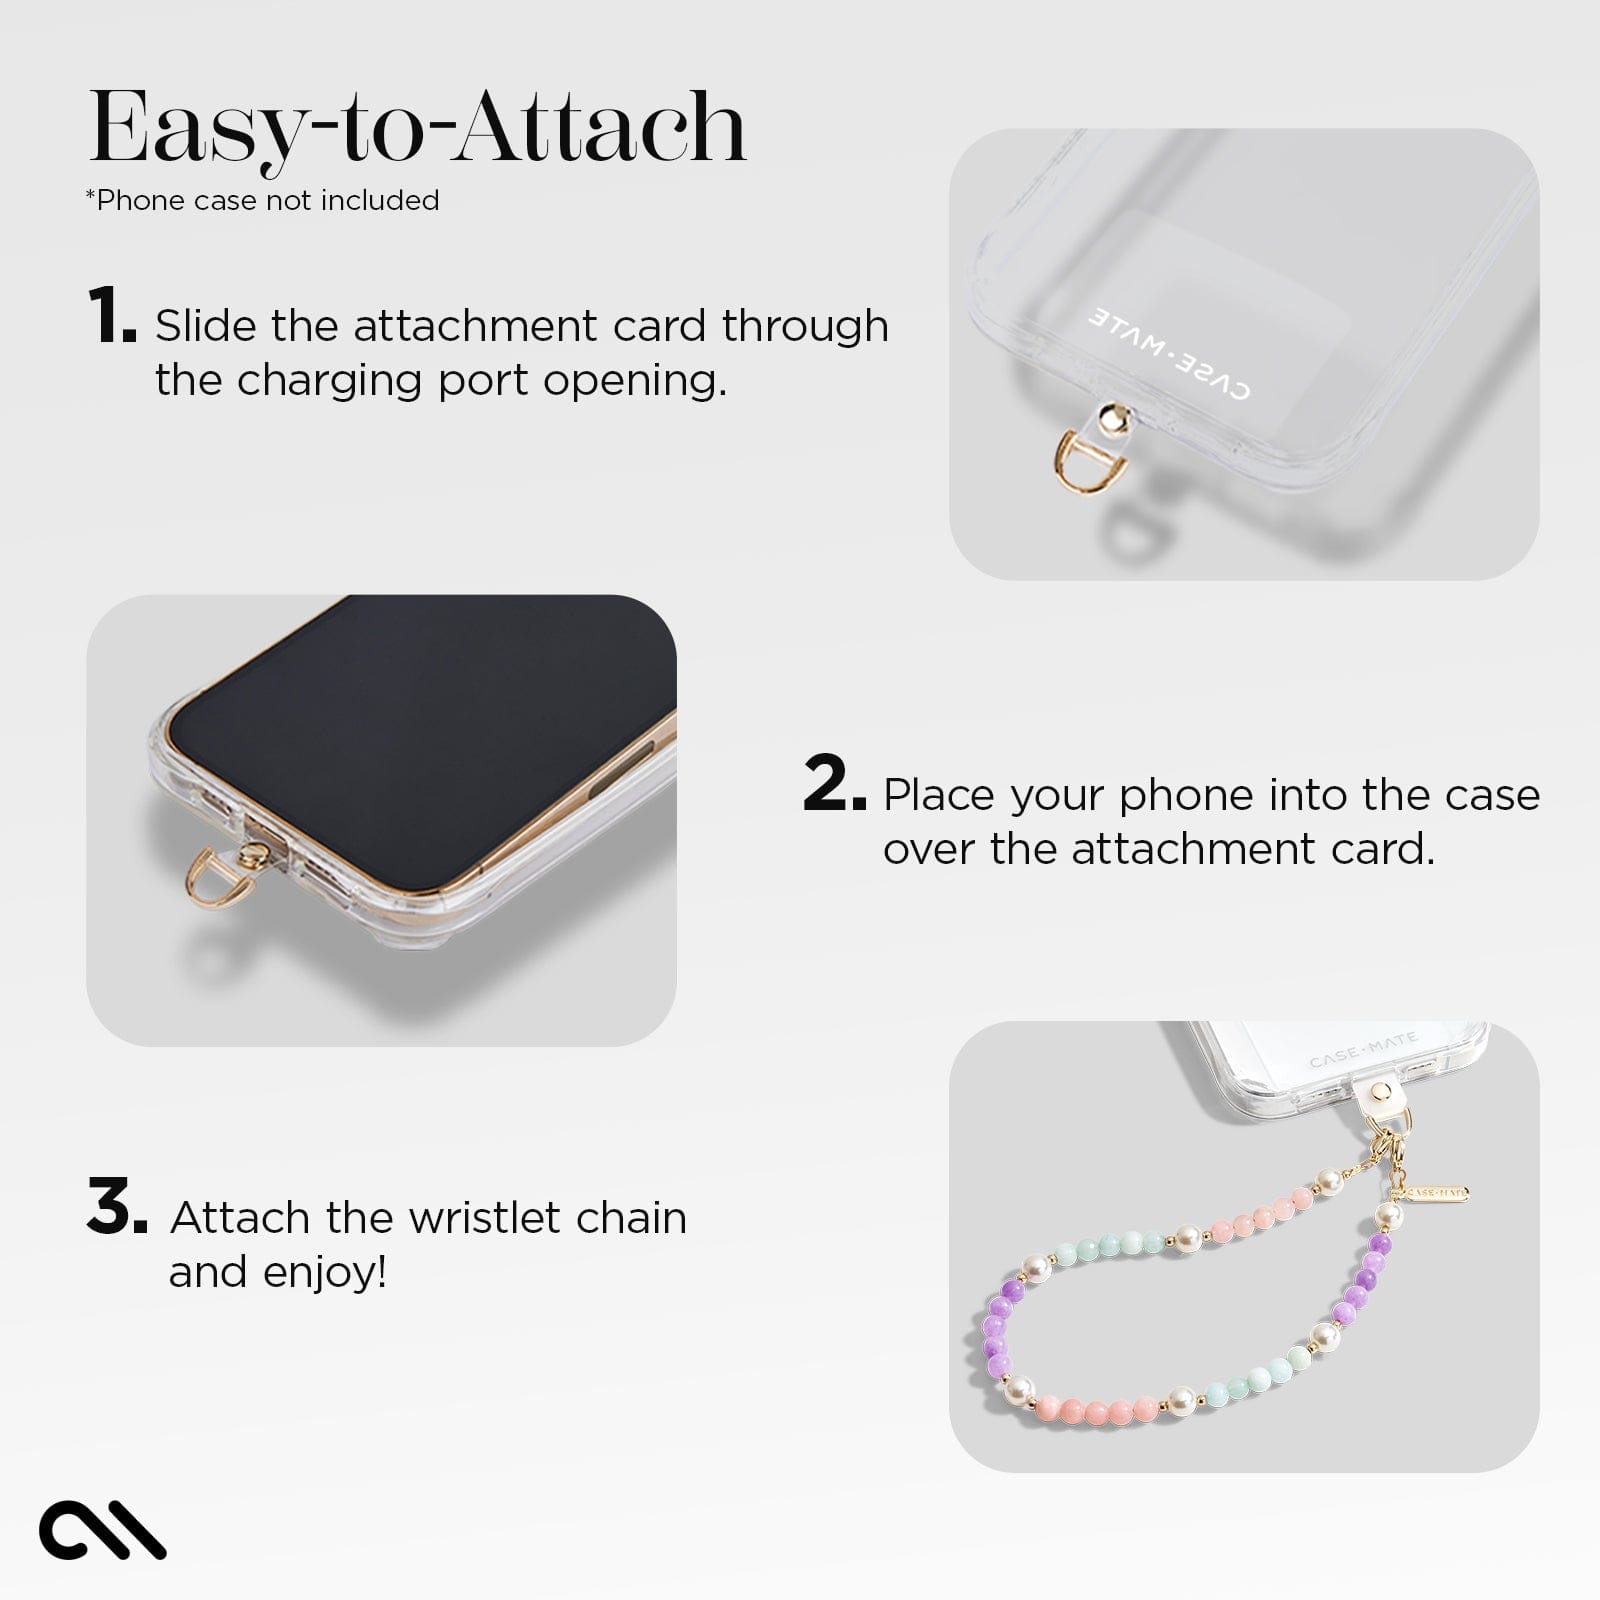 EASY TO ATTACH. 1. SLIDE THE ATTACHMENT CARD THROUGH THE CHARGING PORT OPENING. 2. PLACE YOUR PHONE INTO THE CASE OVER THE ATTACHMENT CARD. 3. ATTACH THE WRISTLET CHAIN AND ENJOY!